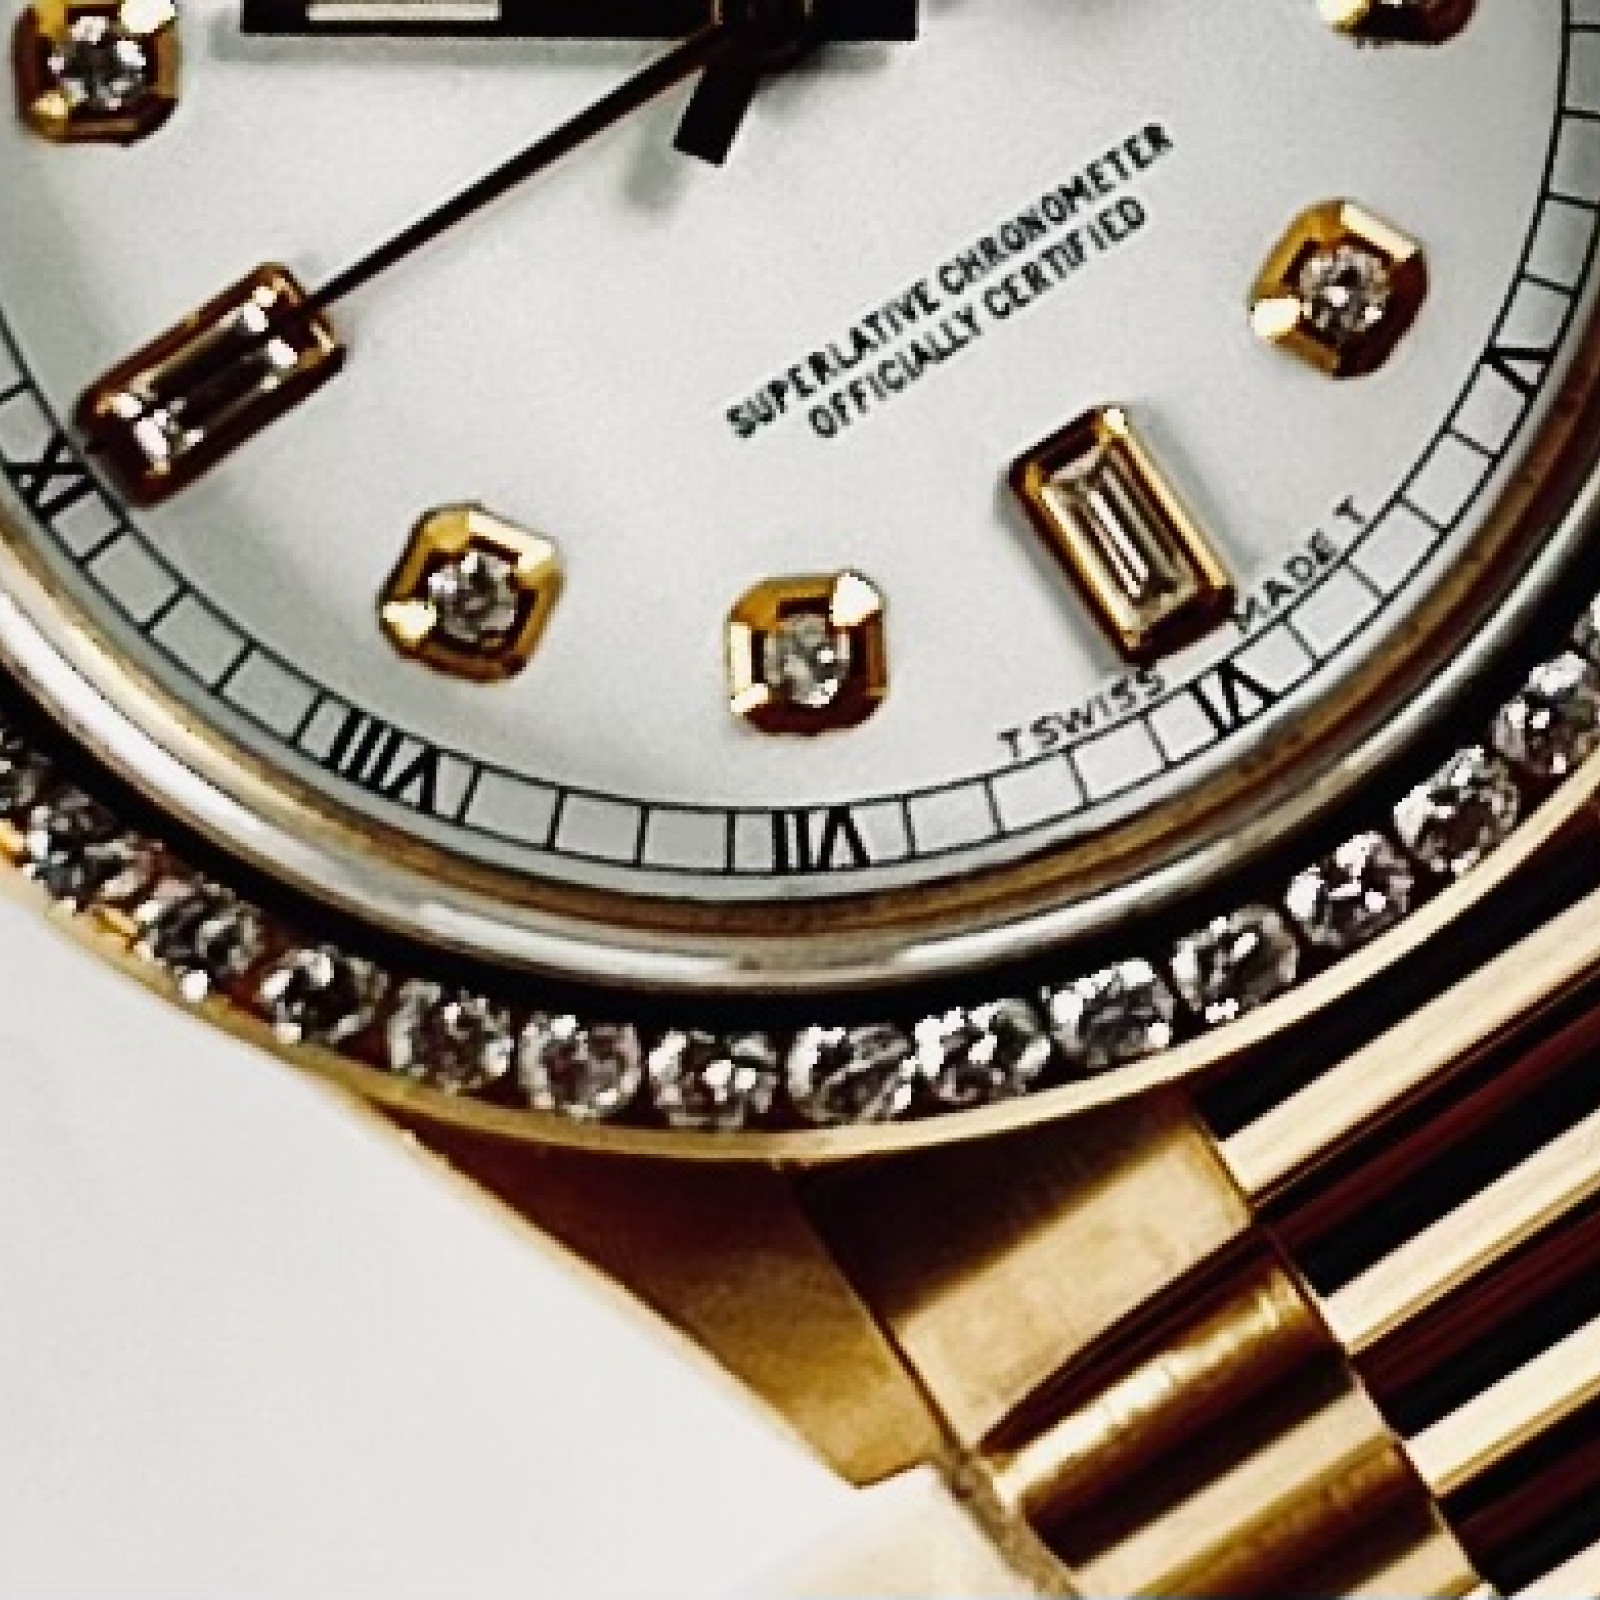 Rolex Day-Date 18038 18KT Gold President